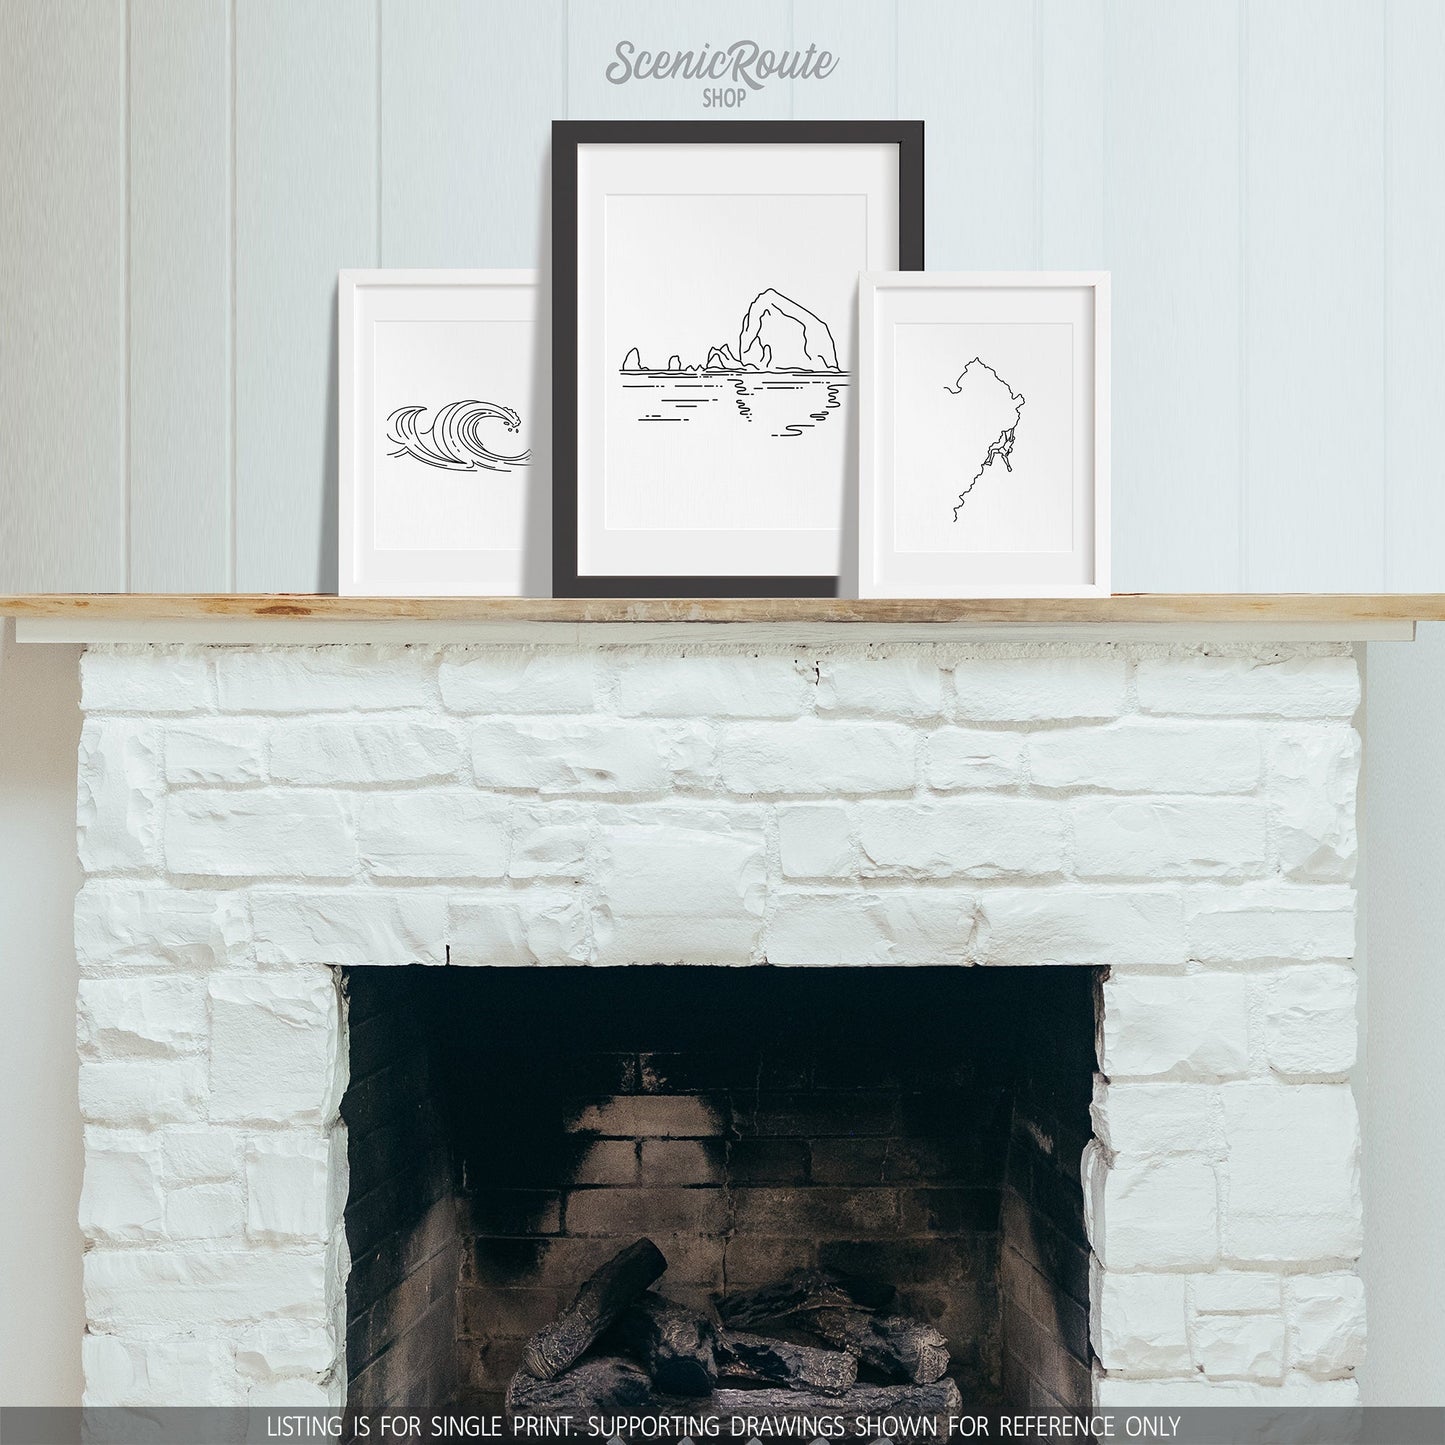 A group of three framed drawings on a fireplace mantle. The line art drawings include Waves, Haystack Rock, and Rock Climbing